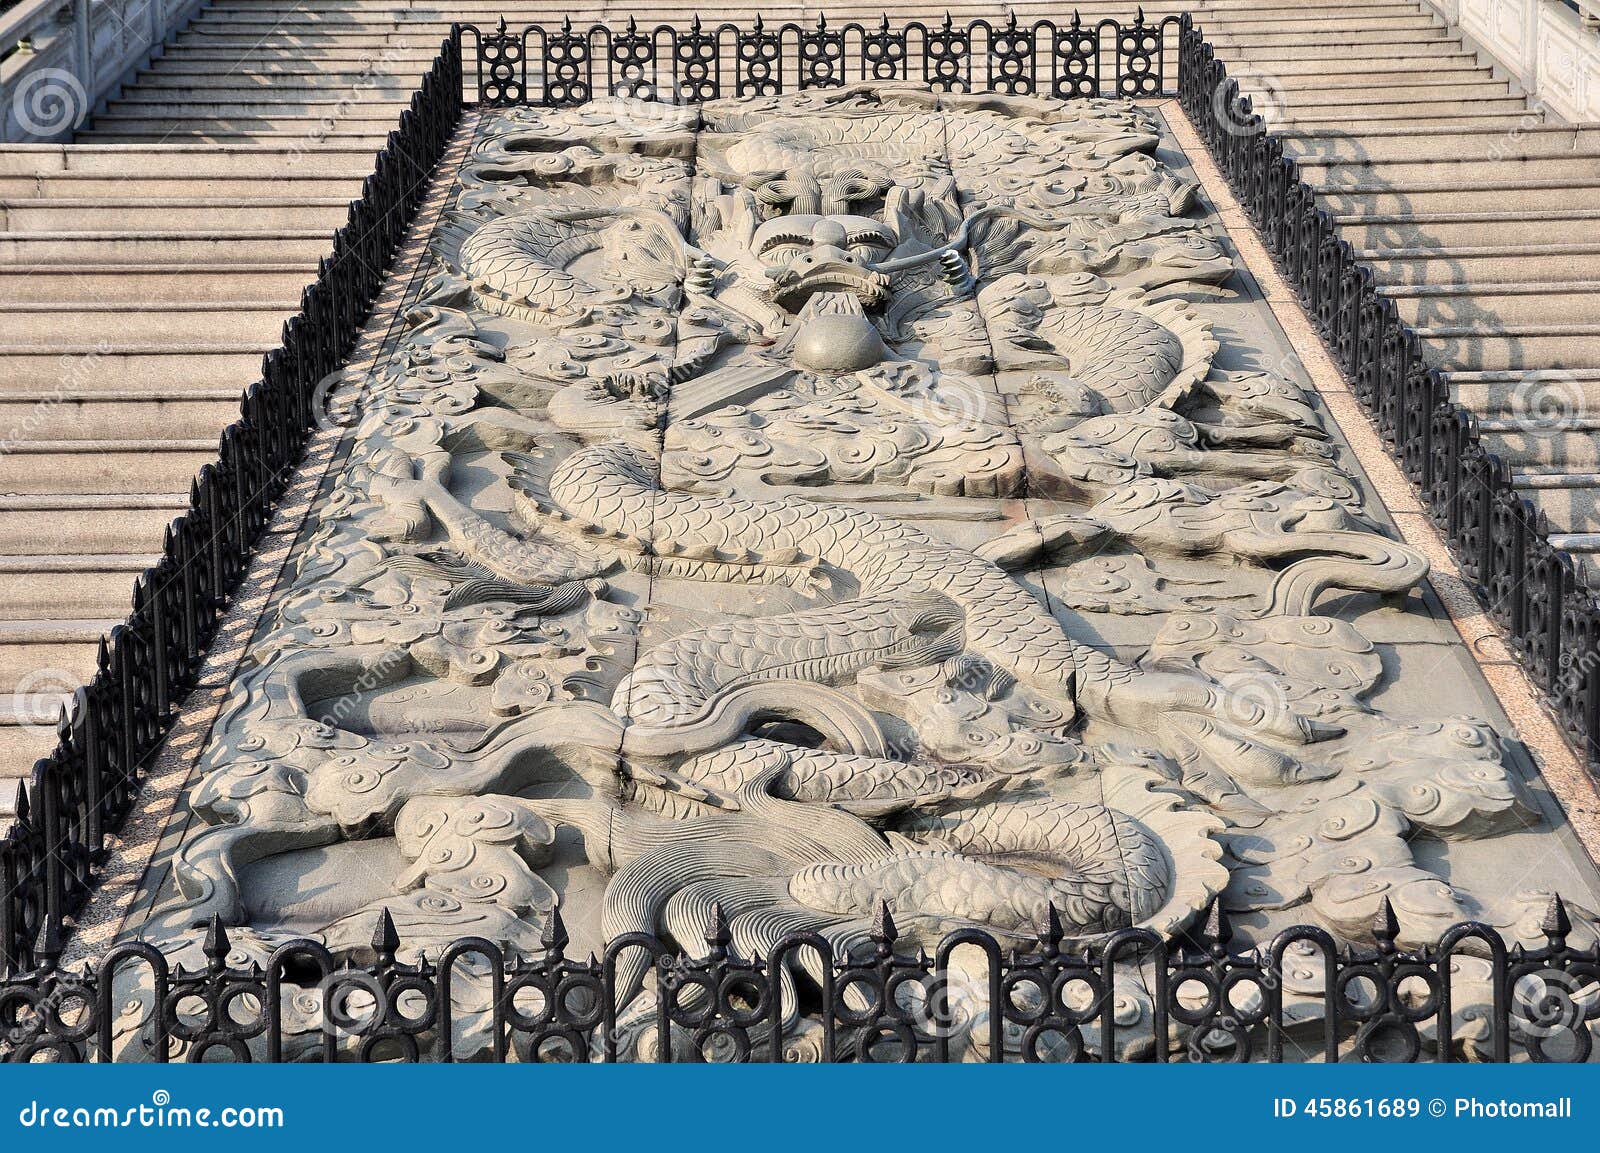 stone carve of chinas dragon,buddhism sculpture, china  ,